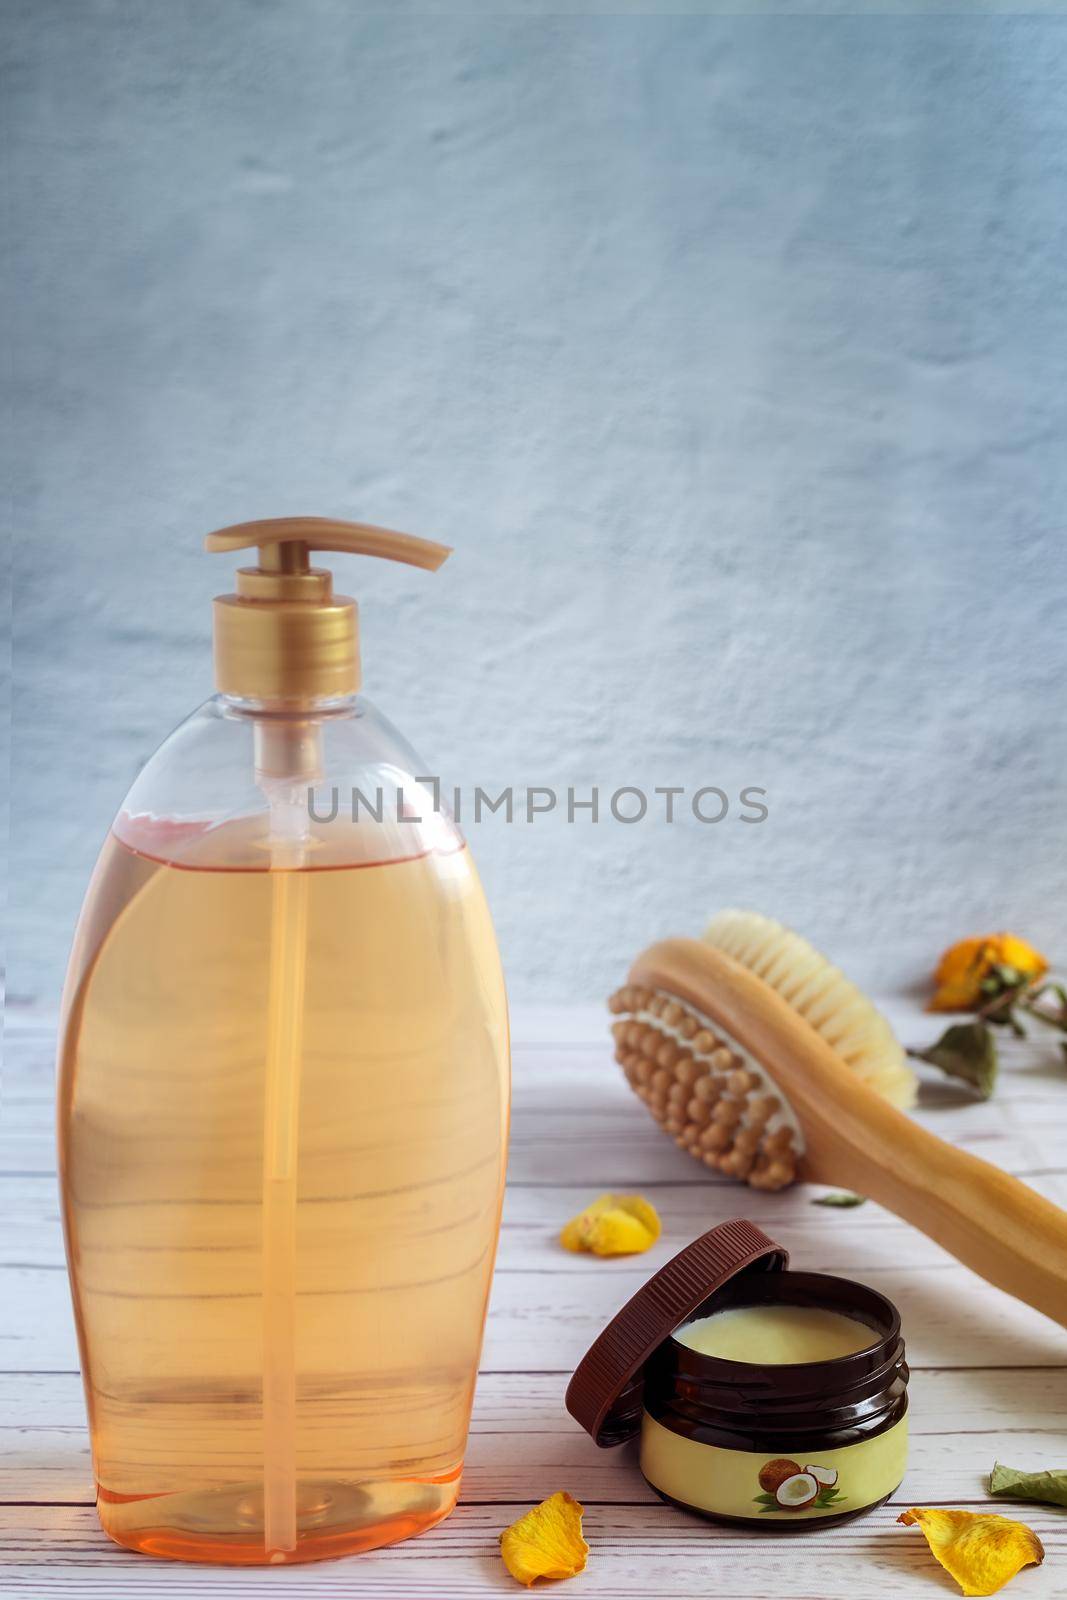 Shower gel in a large bottle, body massage brush and coconut oil for skin care.